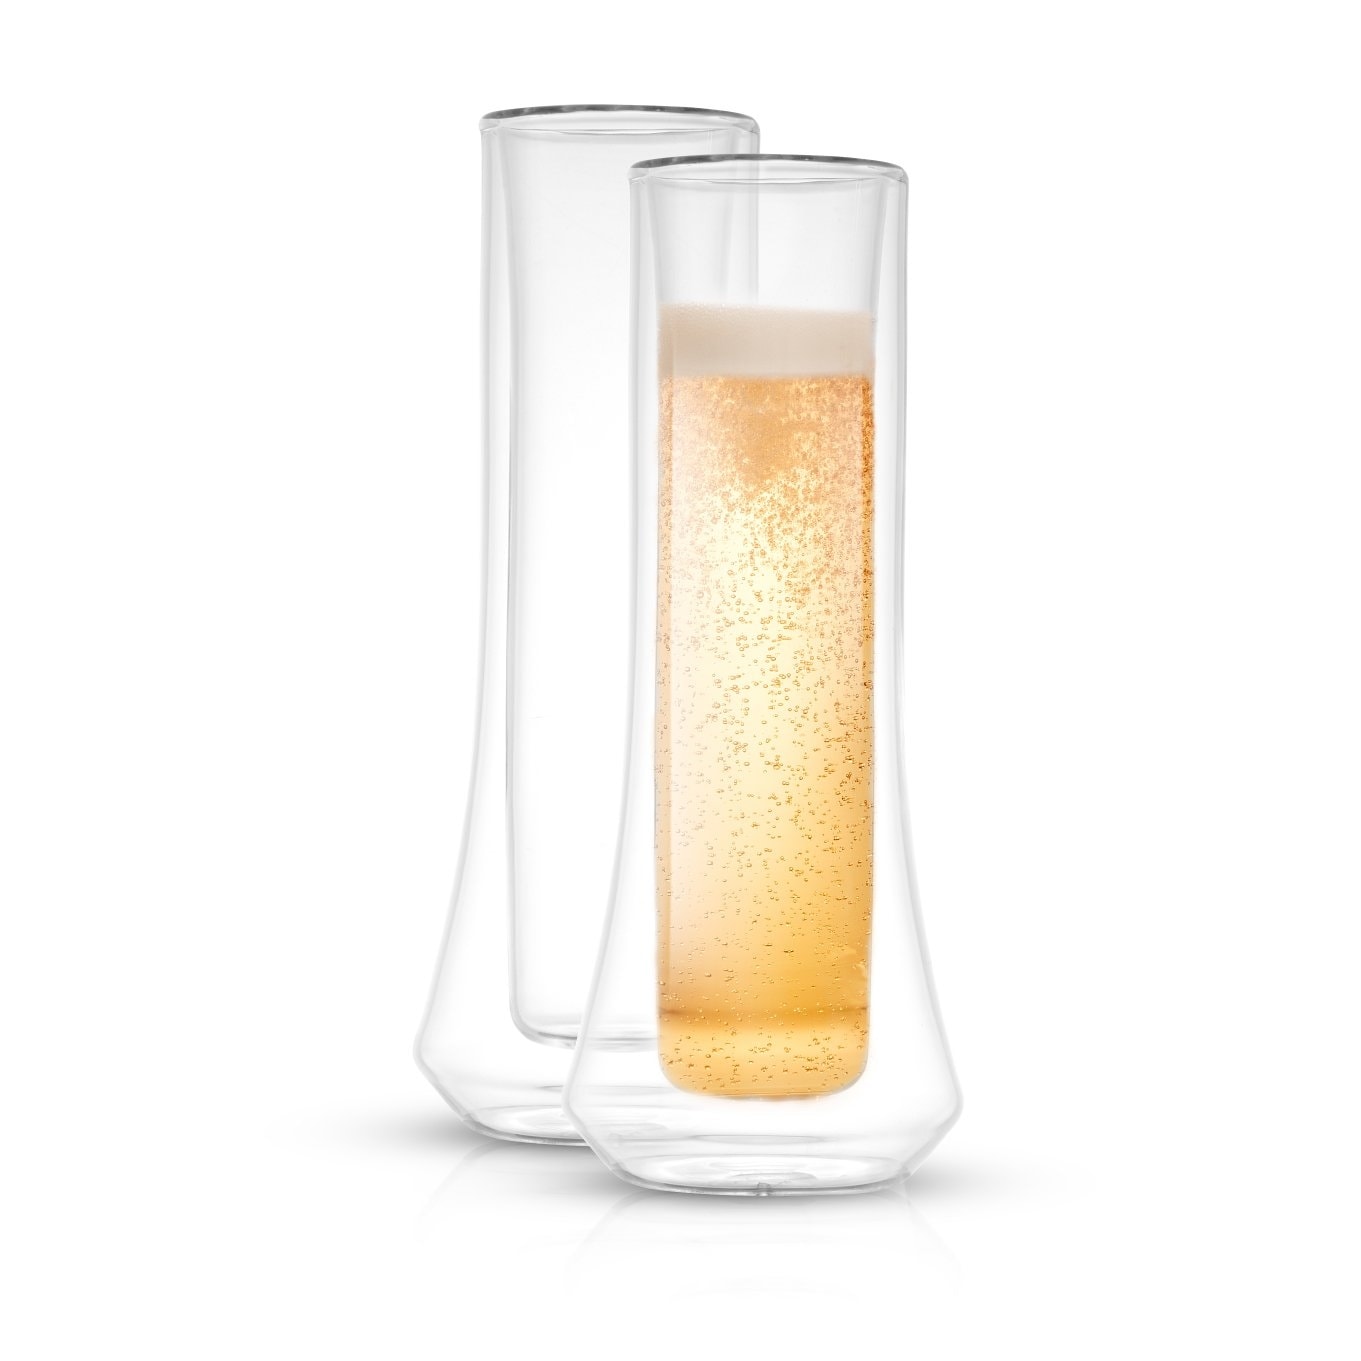 https://ak1.ostkcdn.com/images/products/is/images/direct/3d6513c885a6ae825434e46aba2f009c35d29e02/Cosmo-Double-Wall-Stemless-Champagne-Flutes-Glasses---5-oz---Set-of-4.jpg